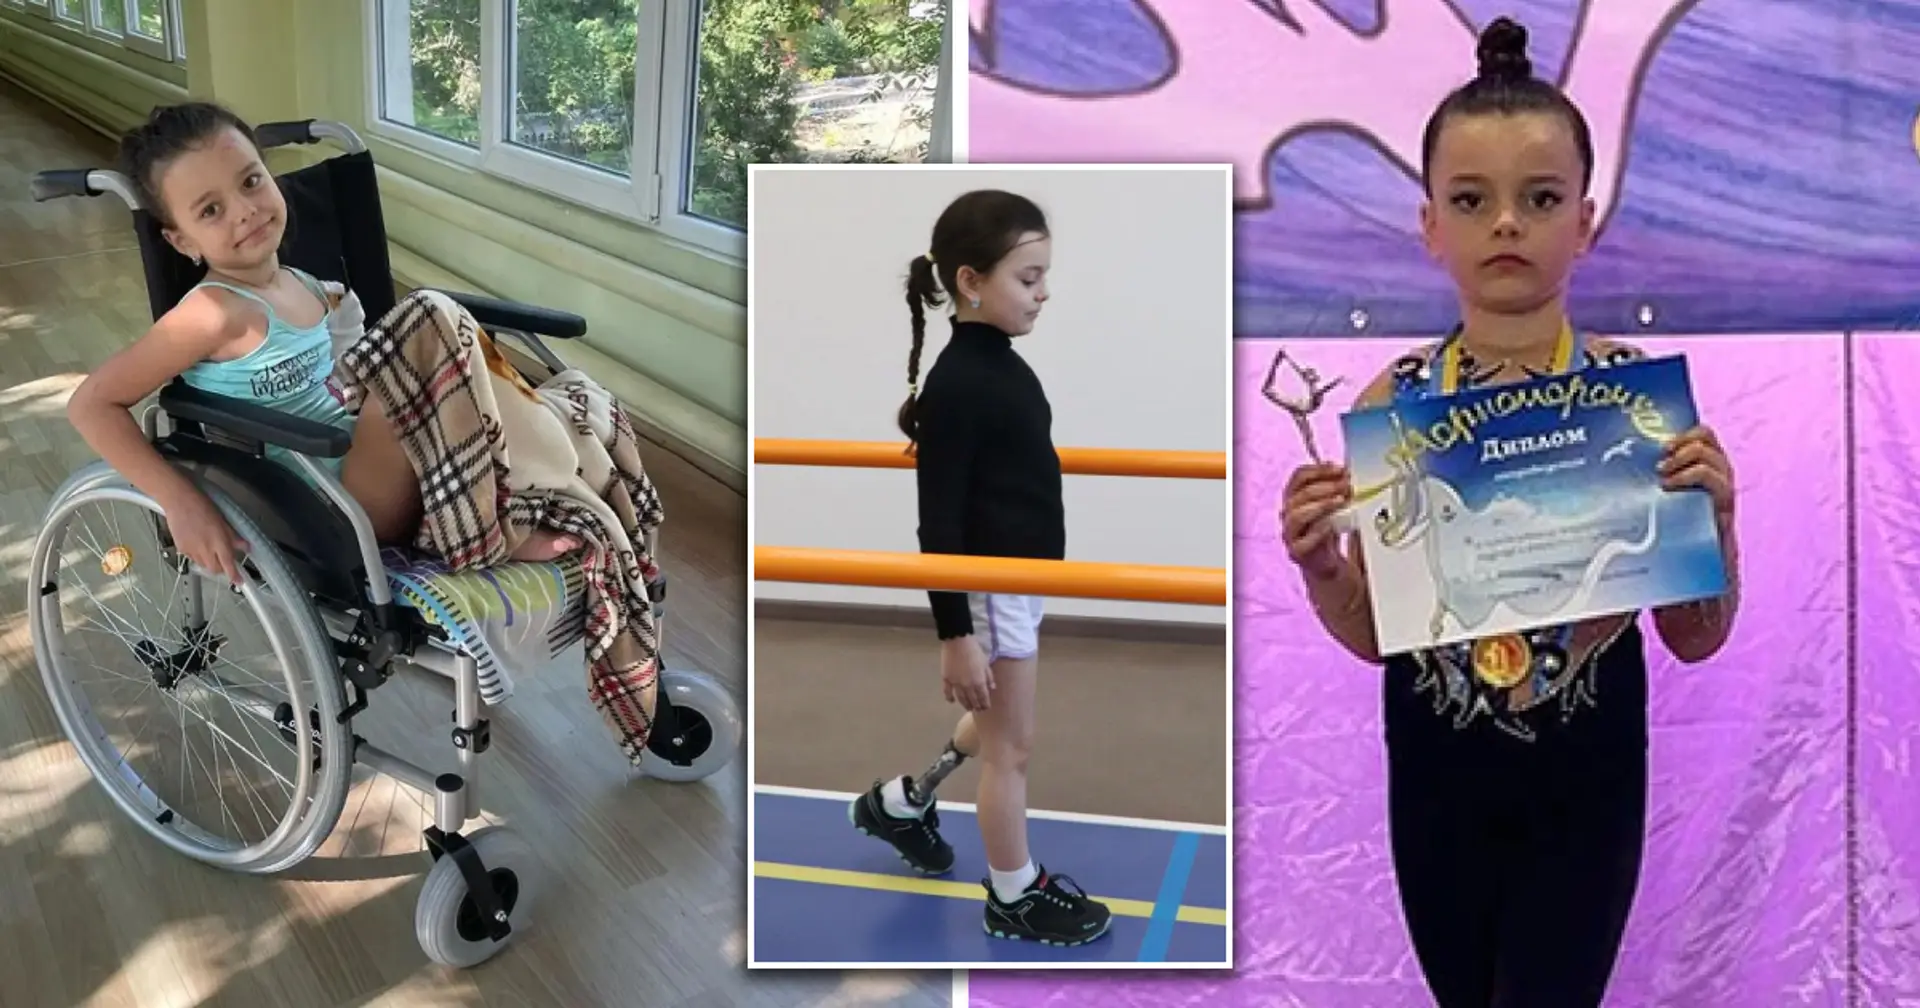 A 7-year-old Ukrainian gymnast who lost her leg in Russian rocket attack won her first competition